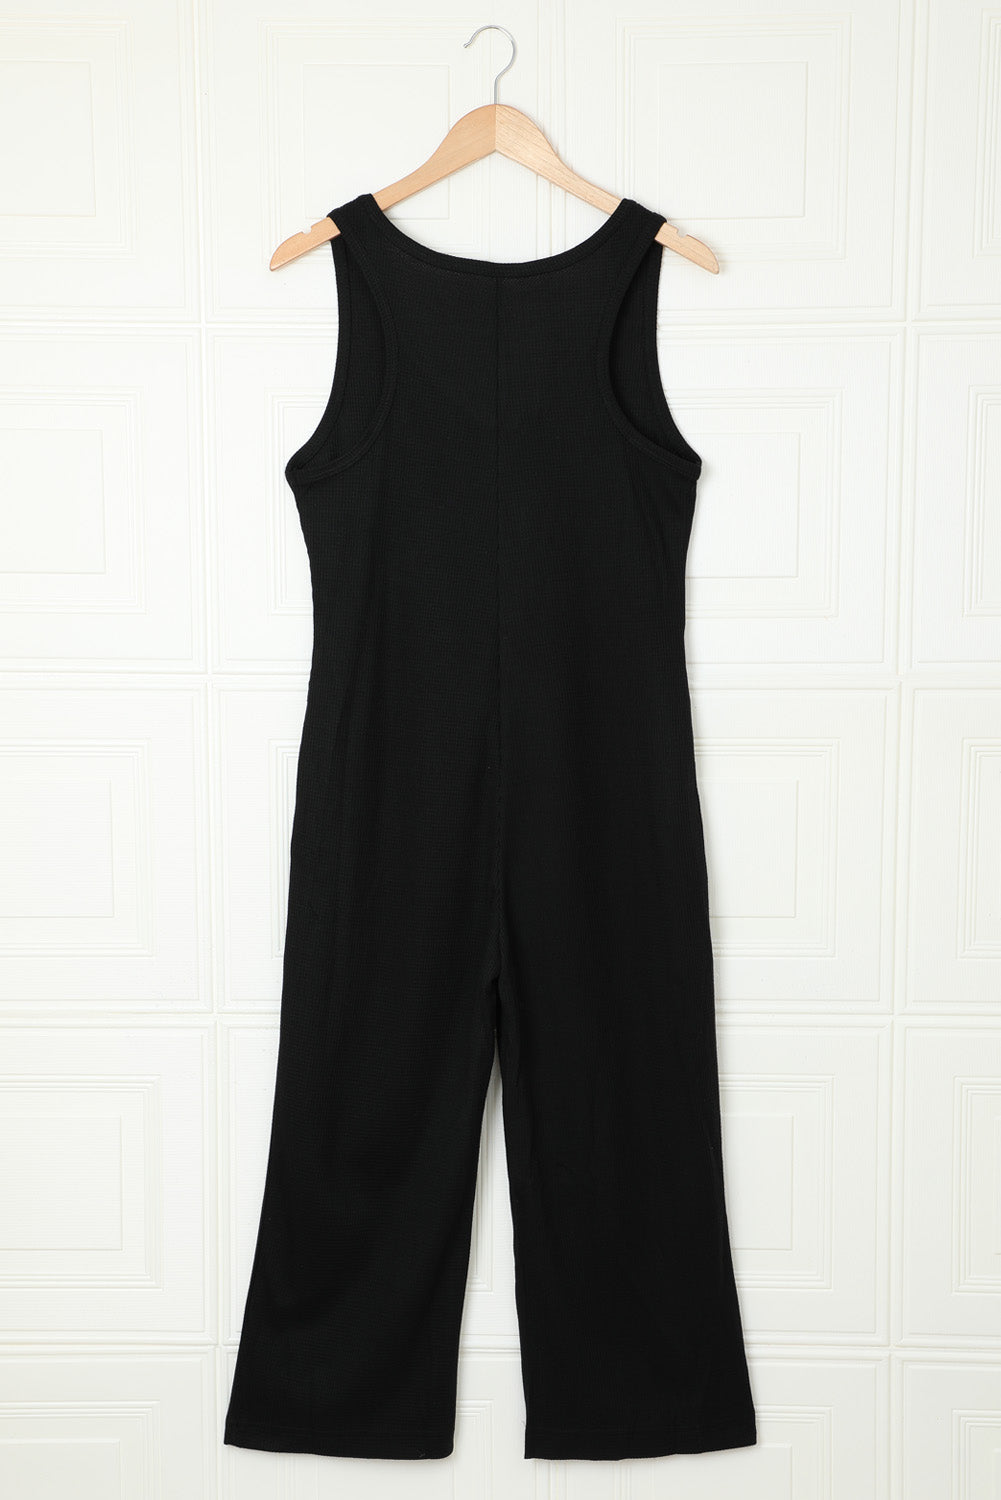 Women's Black Pocketed Thermal Sleeveless Jumpsuit